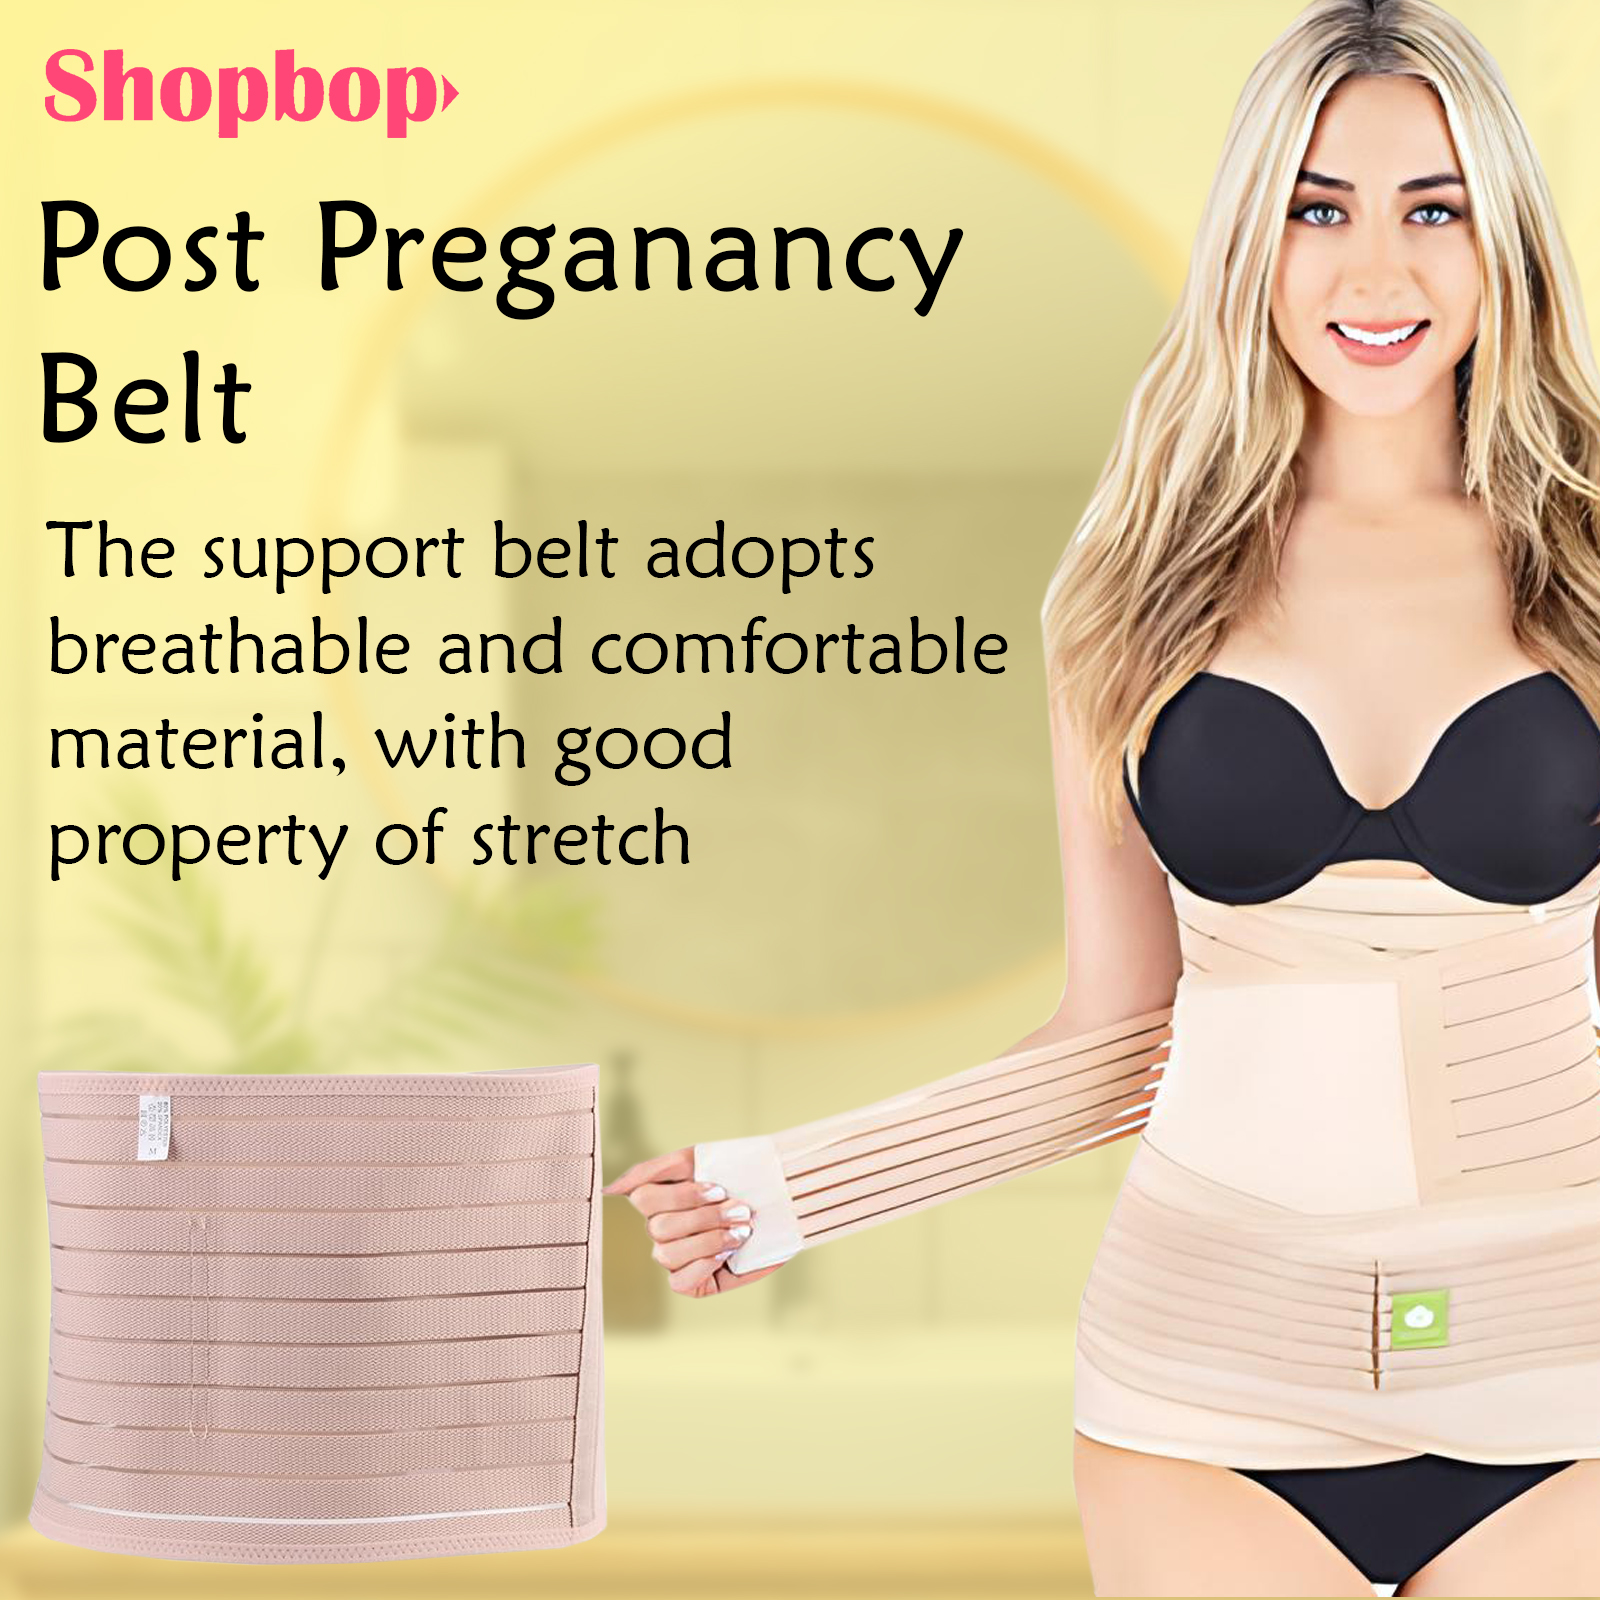 3 in 1 Postpartum Belt After Pregnancy & C Section Recovery Belly Support  Body Shaper Recovery Belt - Shop Bop